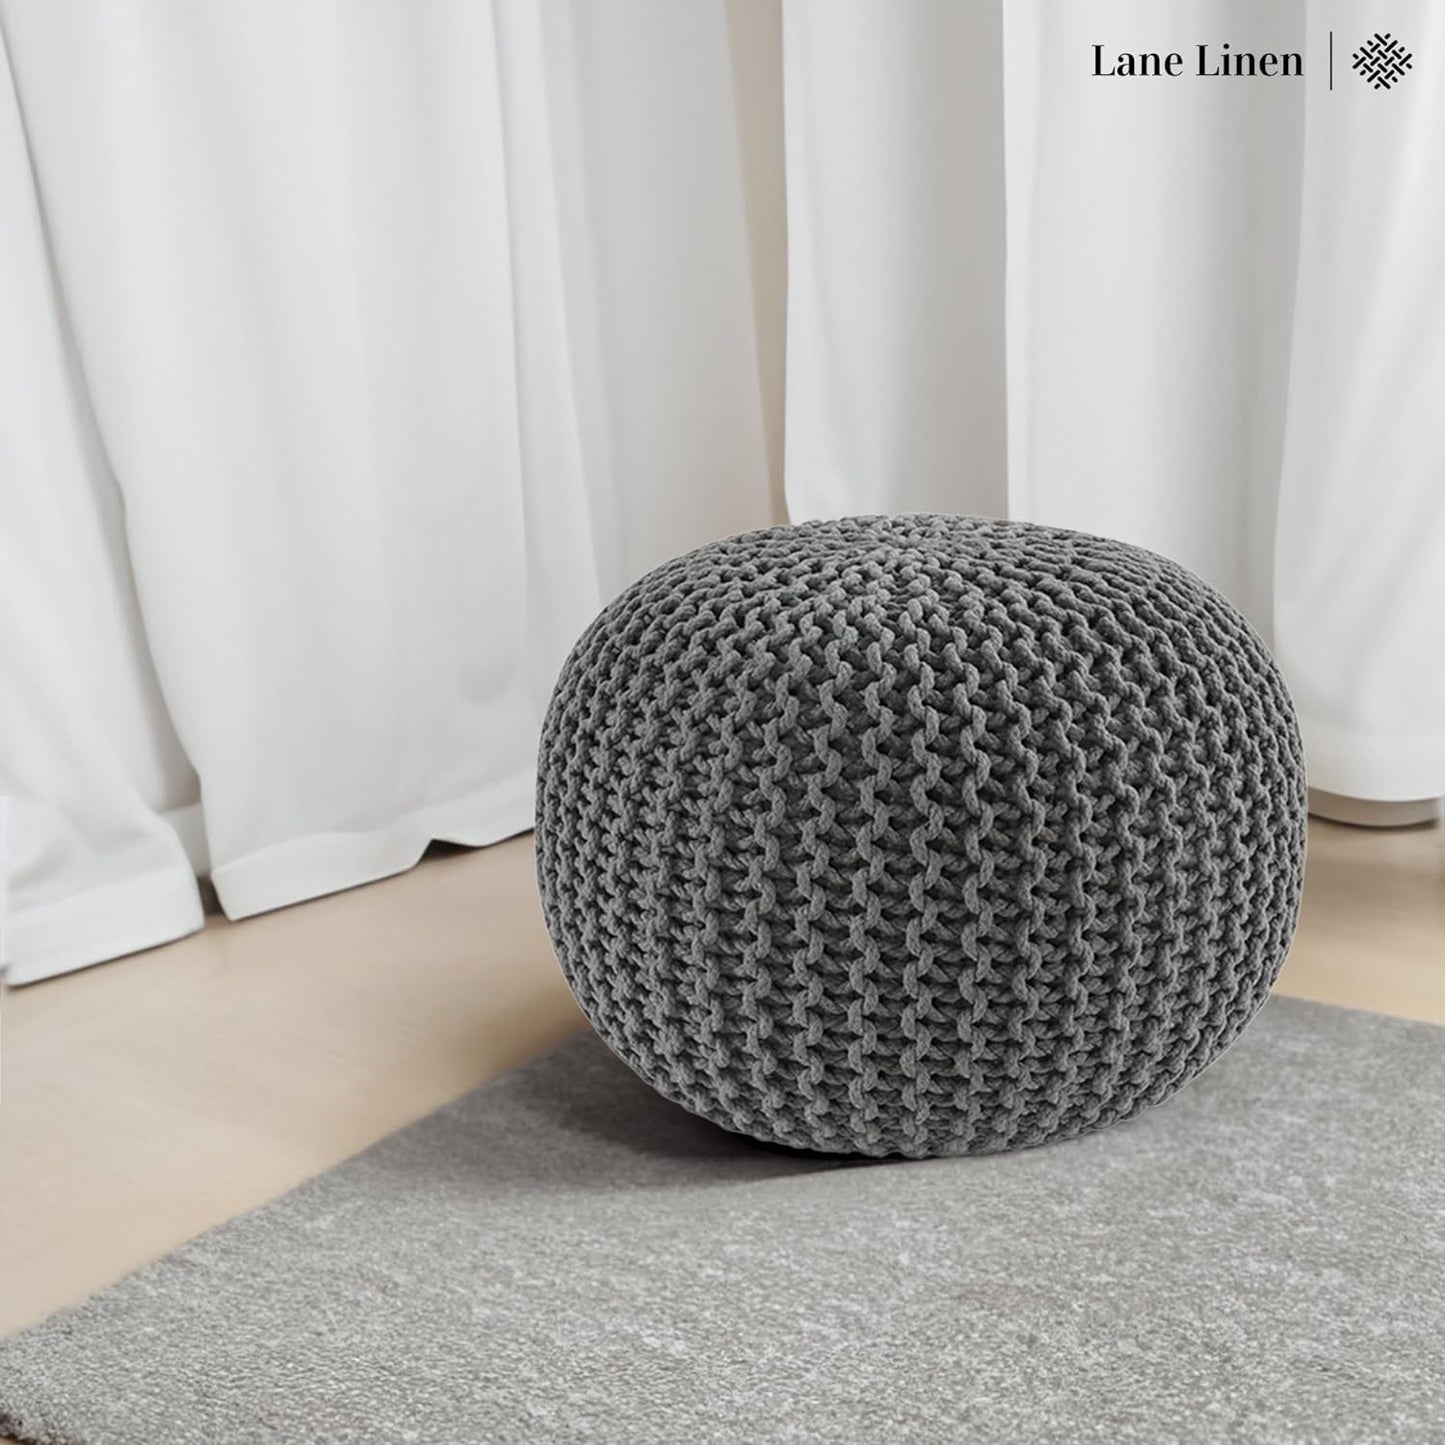 Hand Knitted Cable Style Dori Pouf - Dark Grey, Floor Ottoman - 100% Cotton Braid Cord - Handmade & Hand Stitched - Truly One of a Kind Seating - 20 Diameter X 14 Height